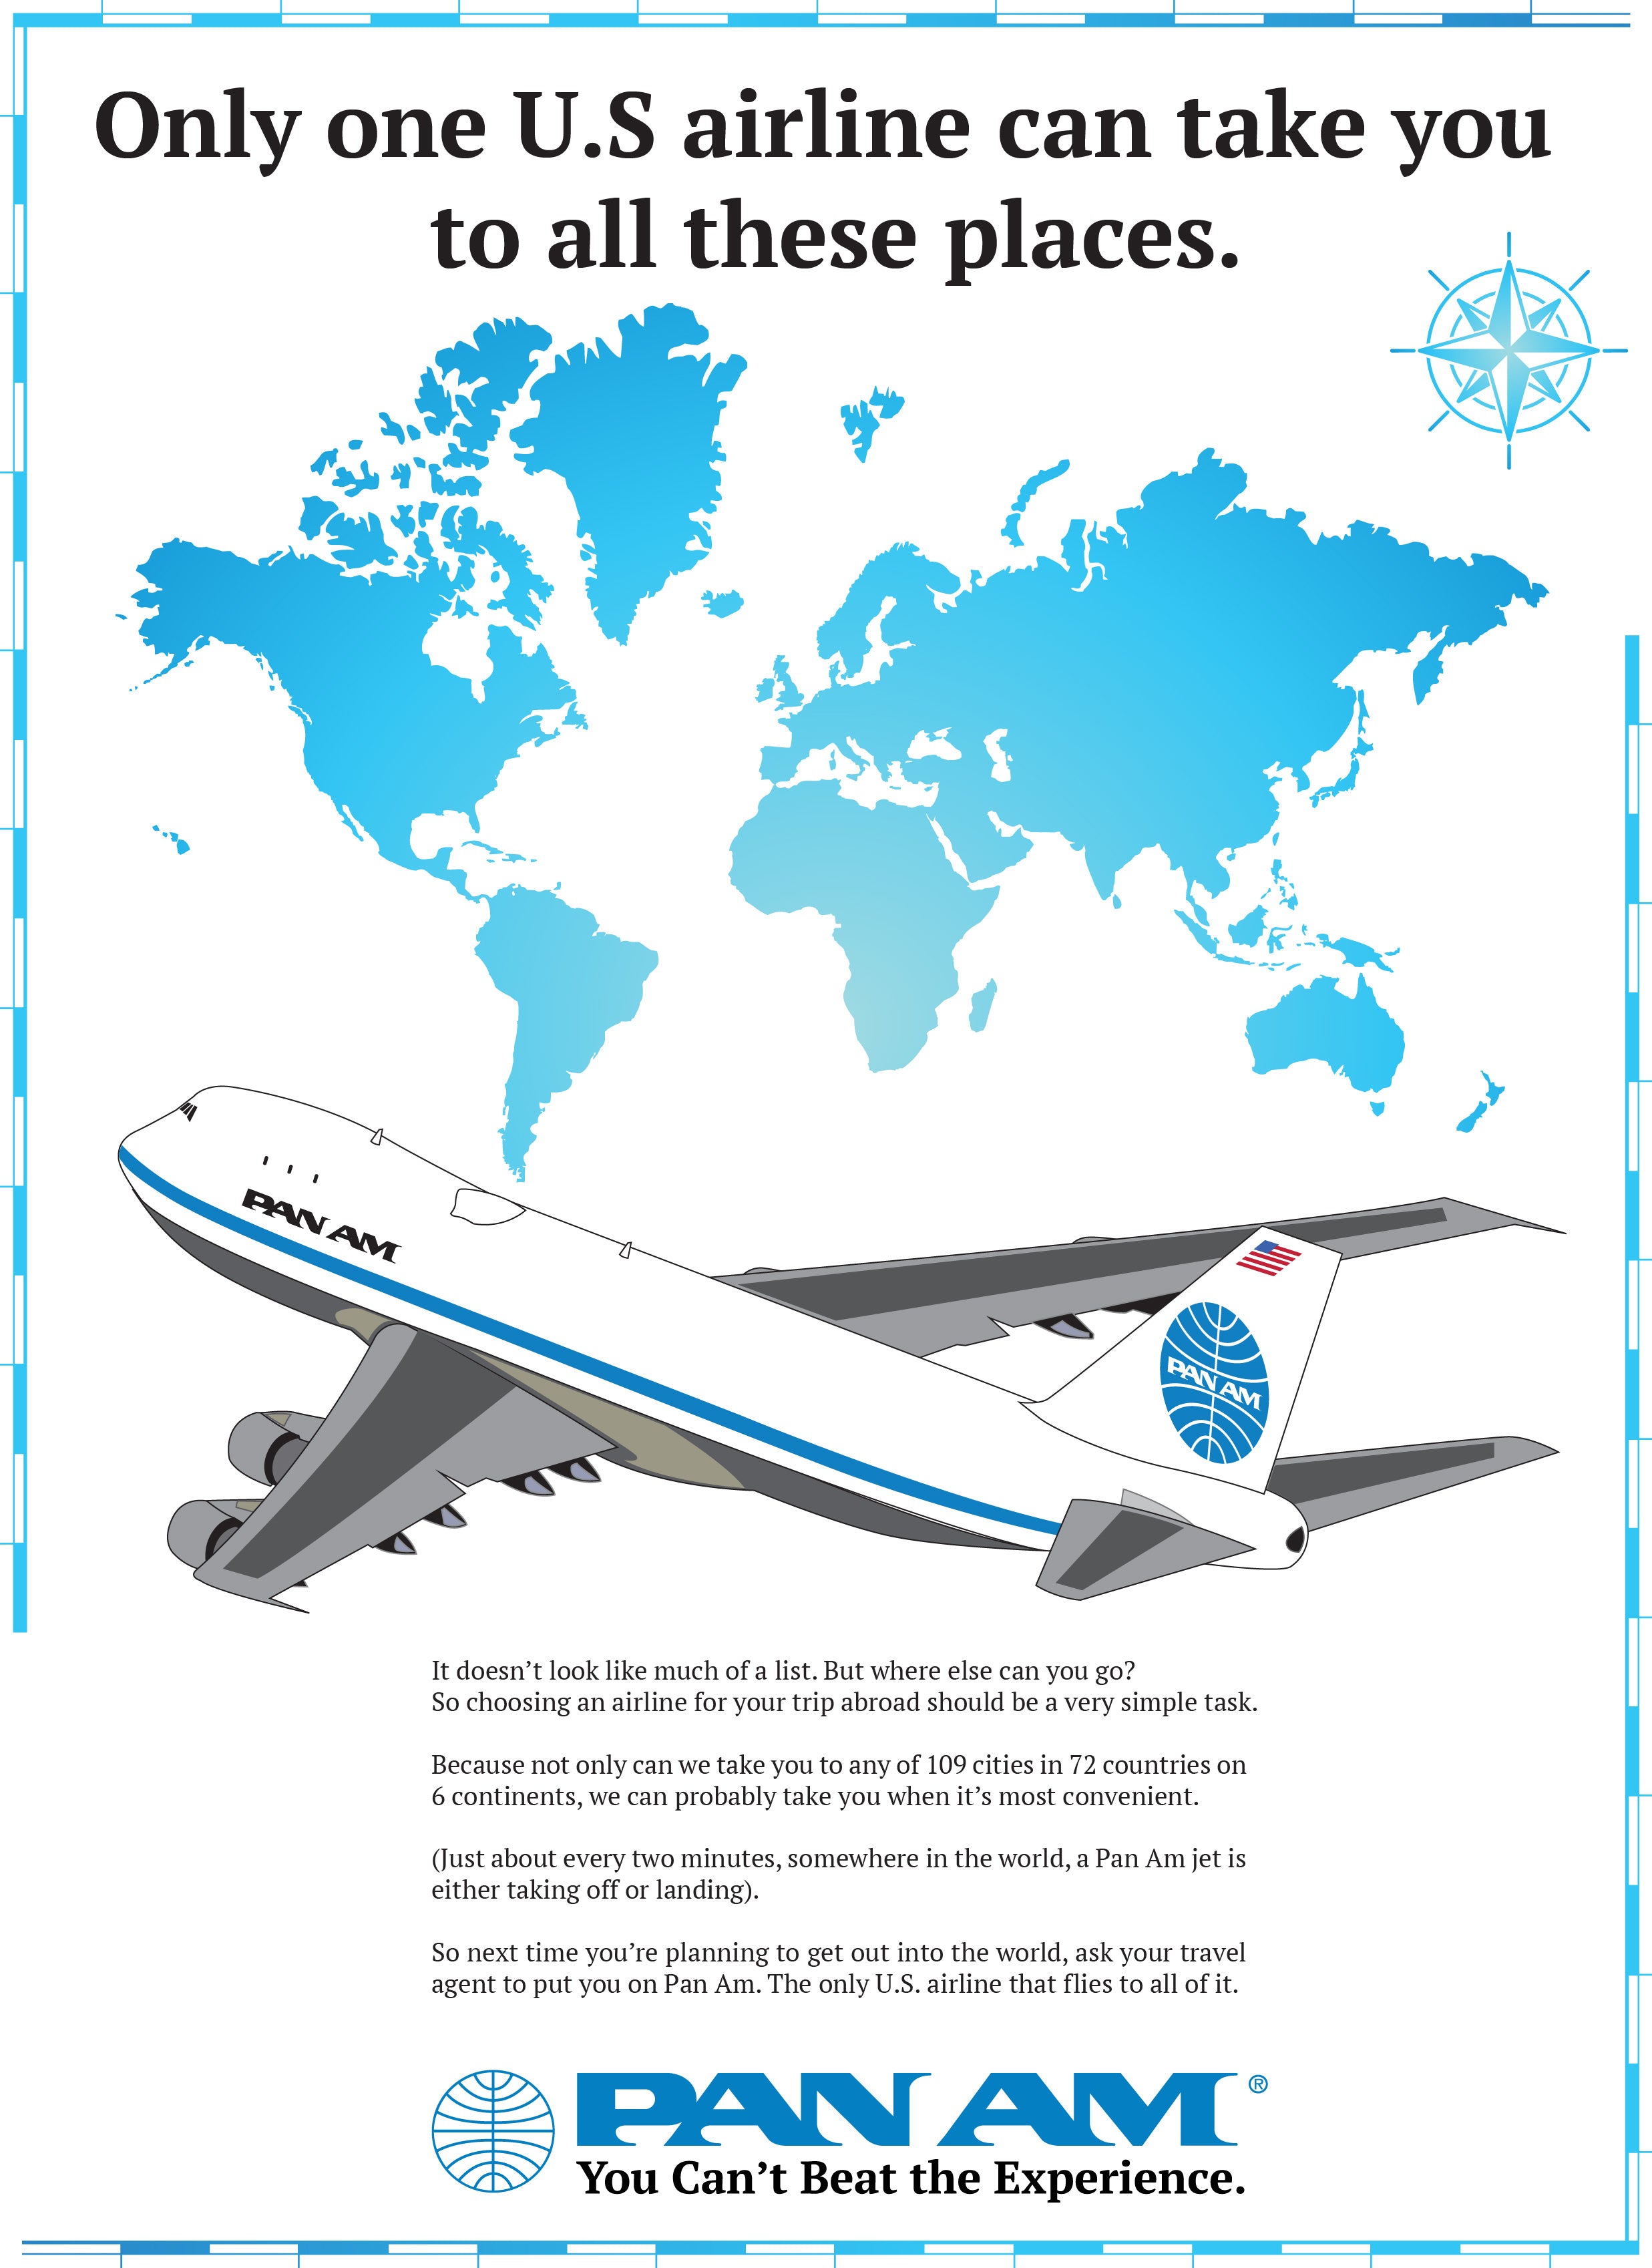 POSTER - Tribute to Pan Am and the world